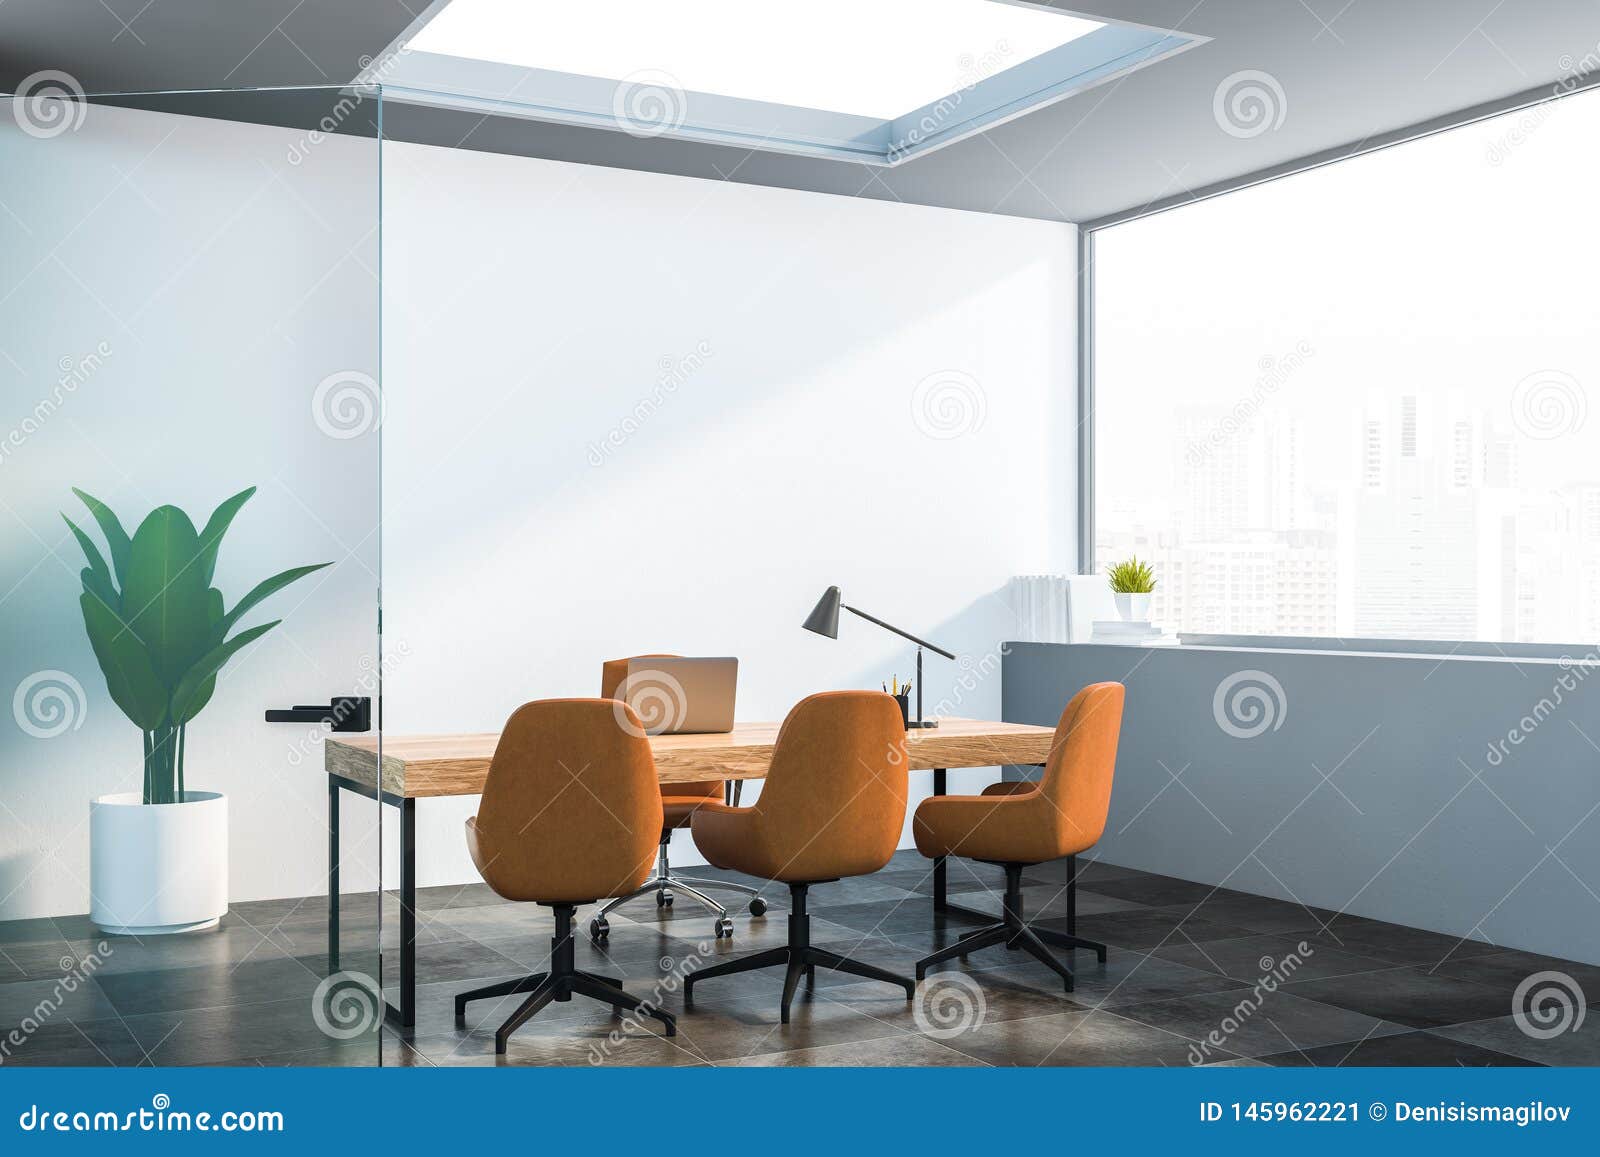 White Manager Office Interior With Open Door Stock